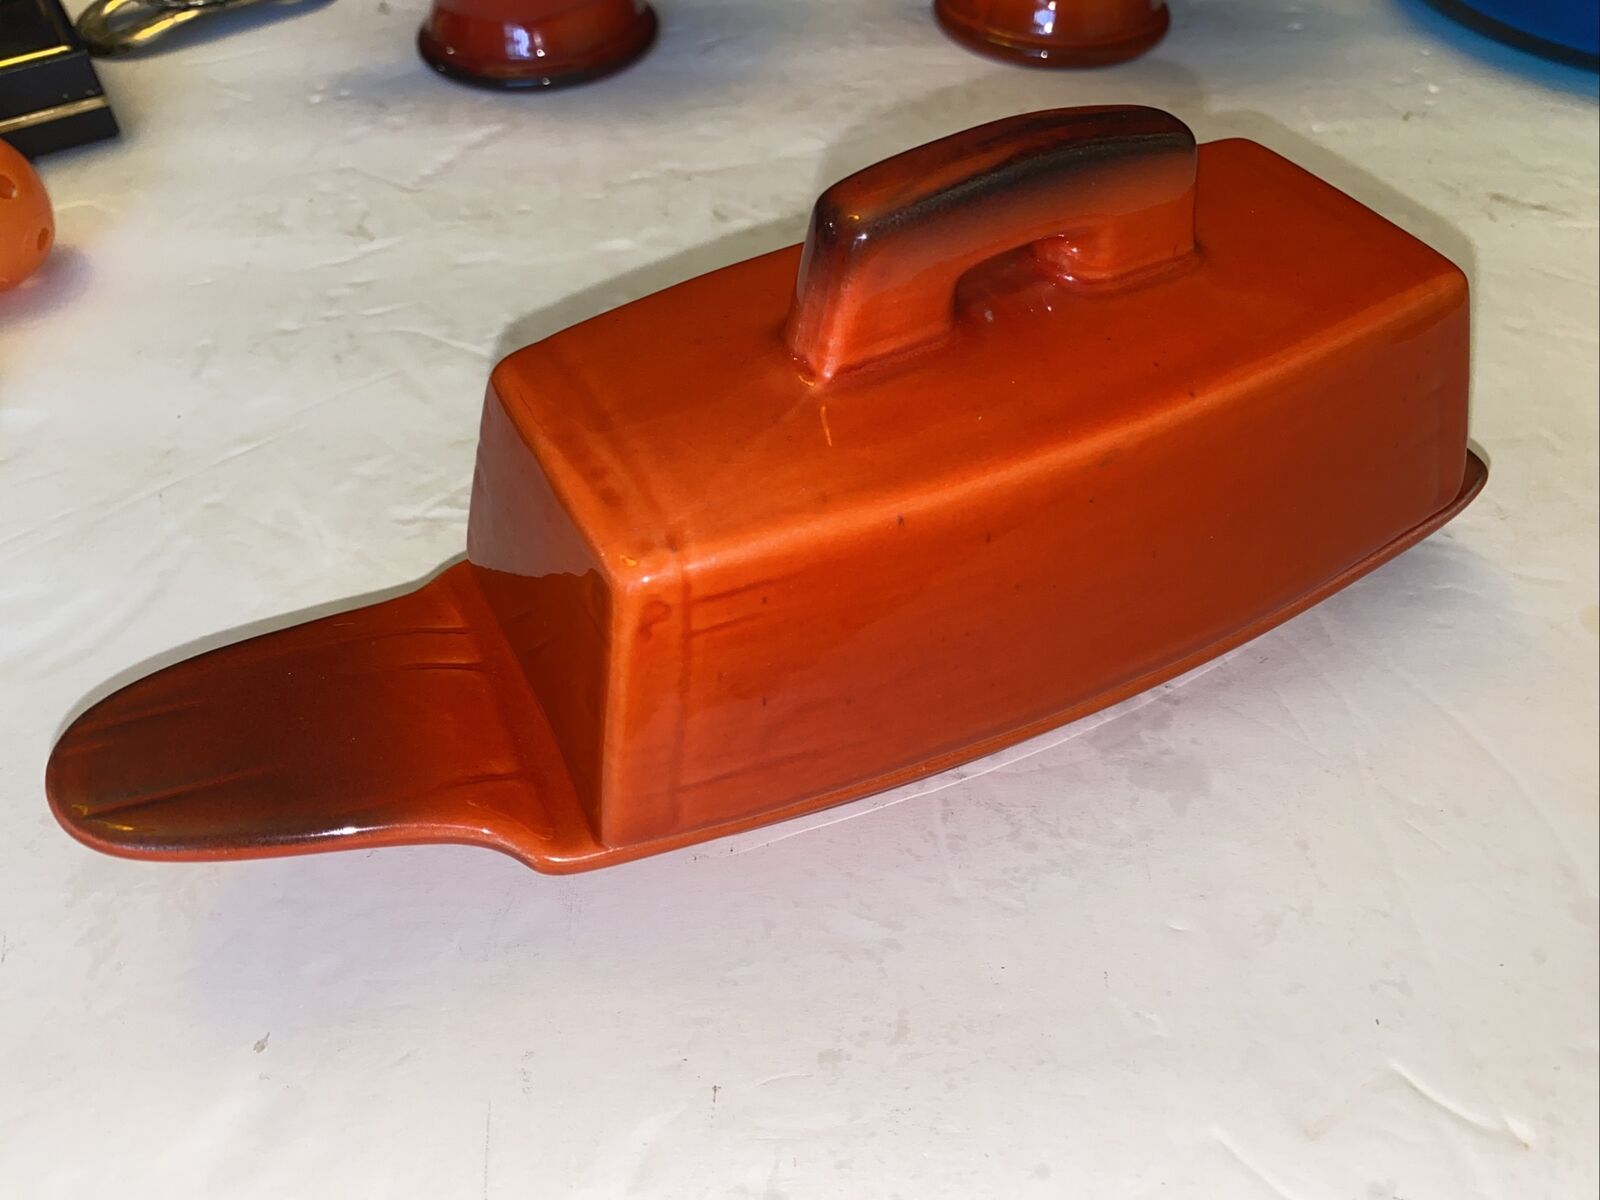 Vintage Mcm Metlox Poppytrail Red Rooster Lidded Butter Dish Mid Century Modern